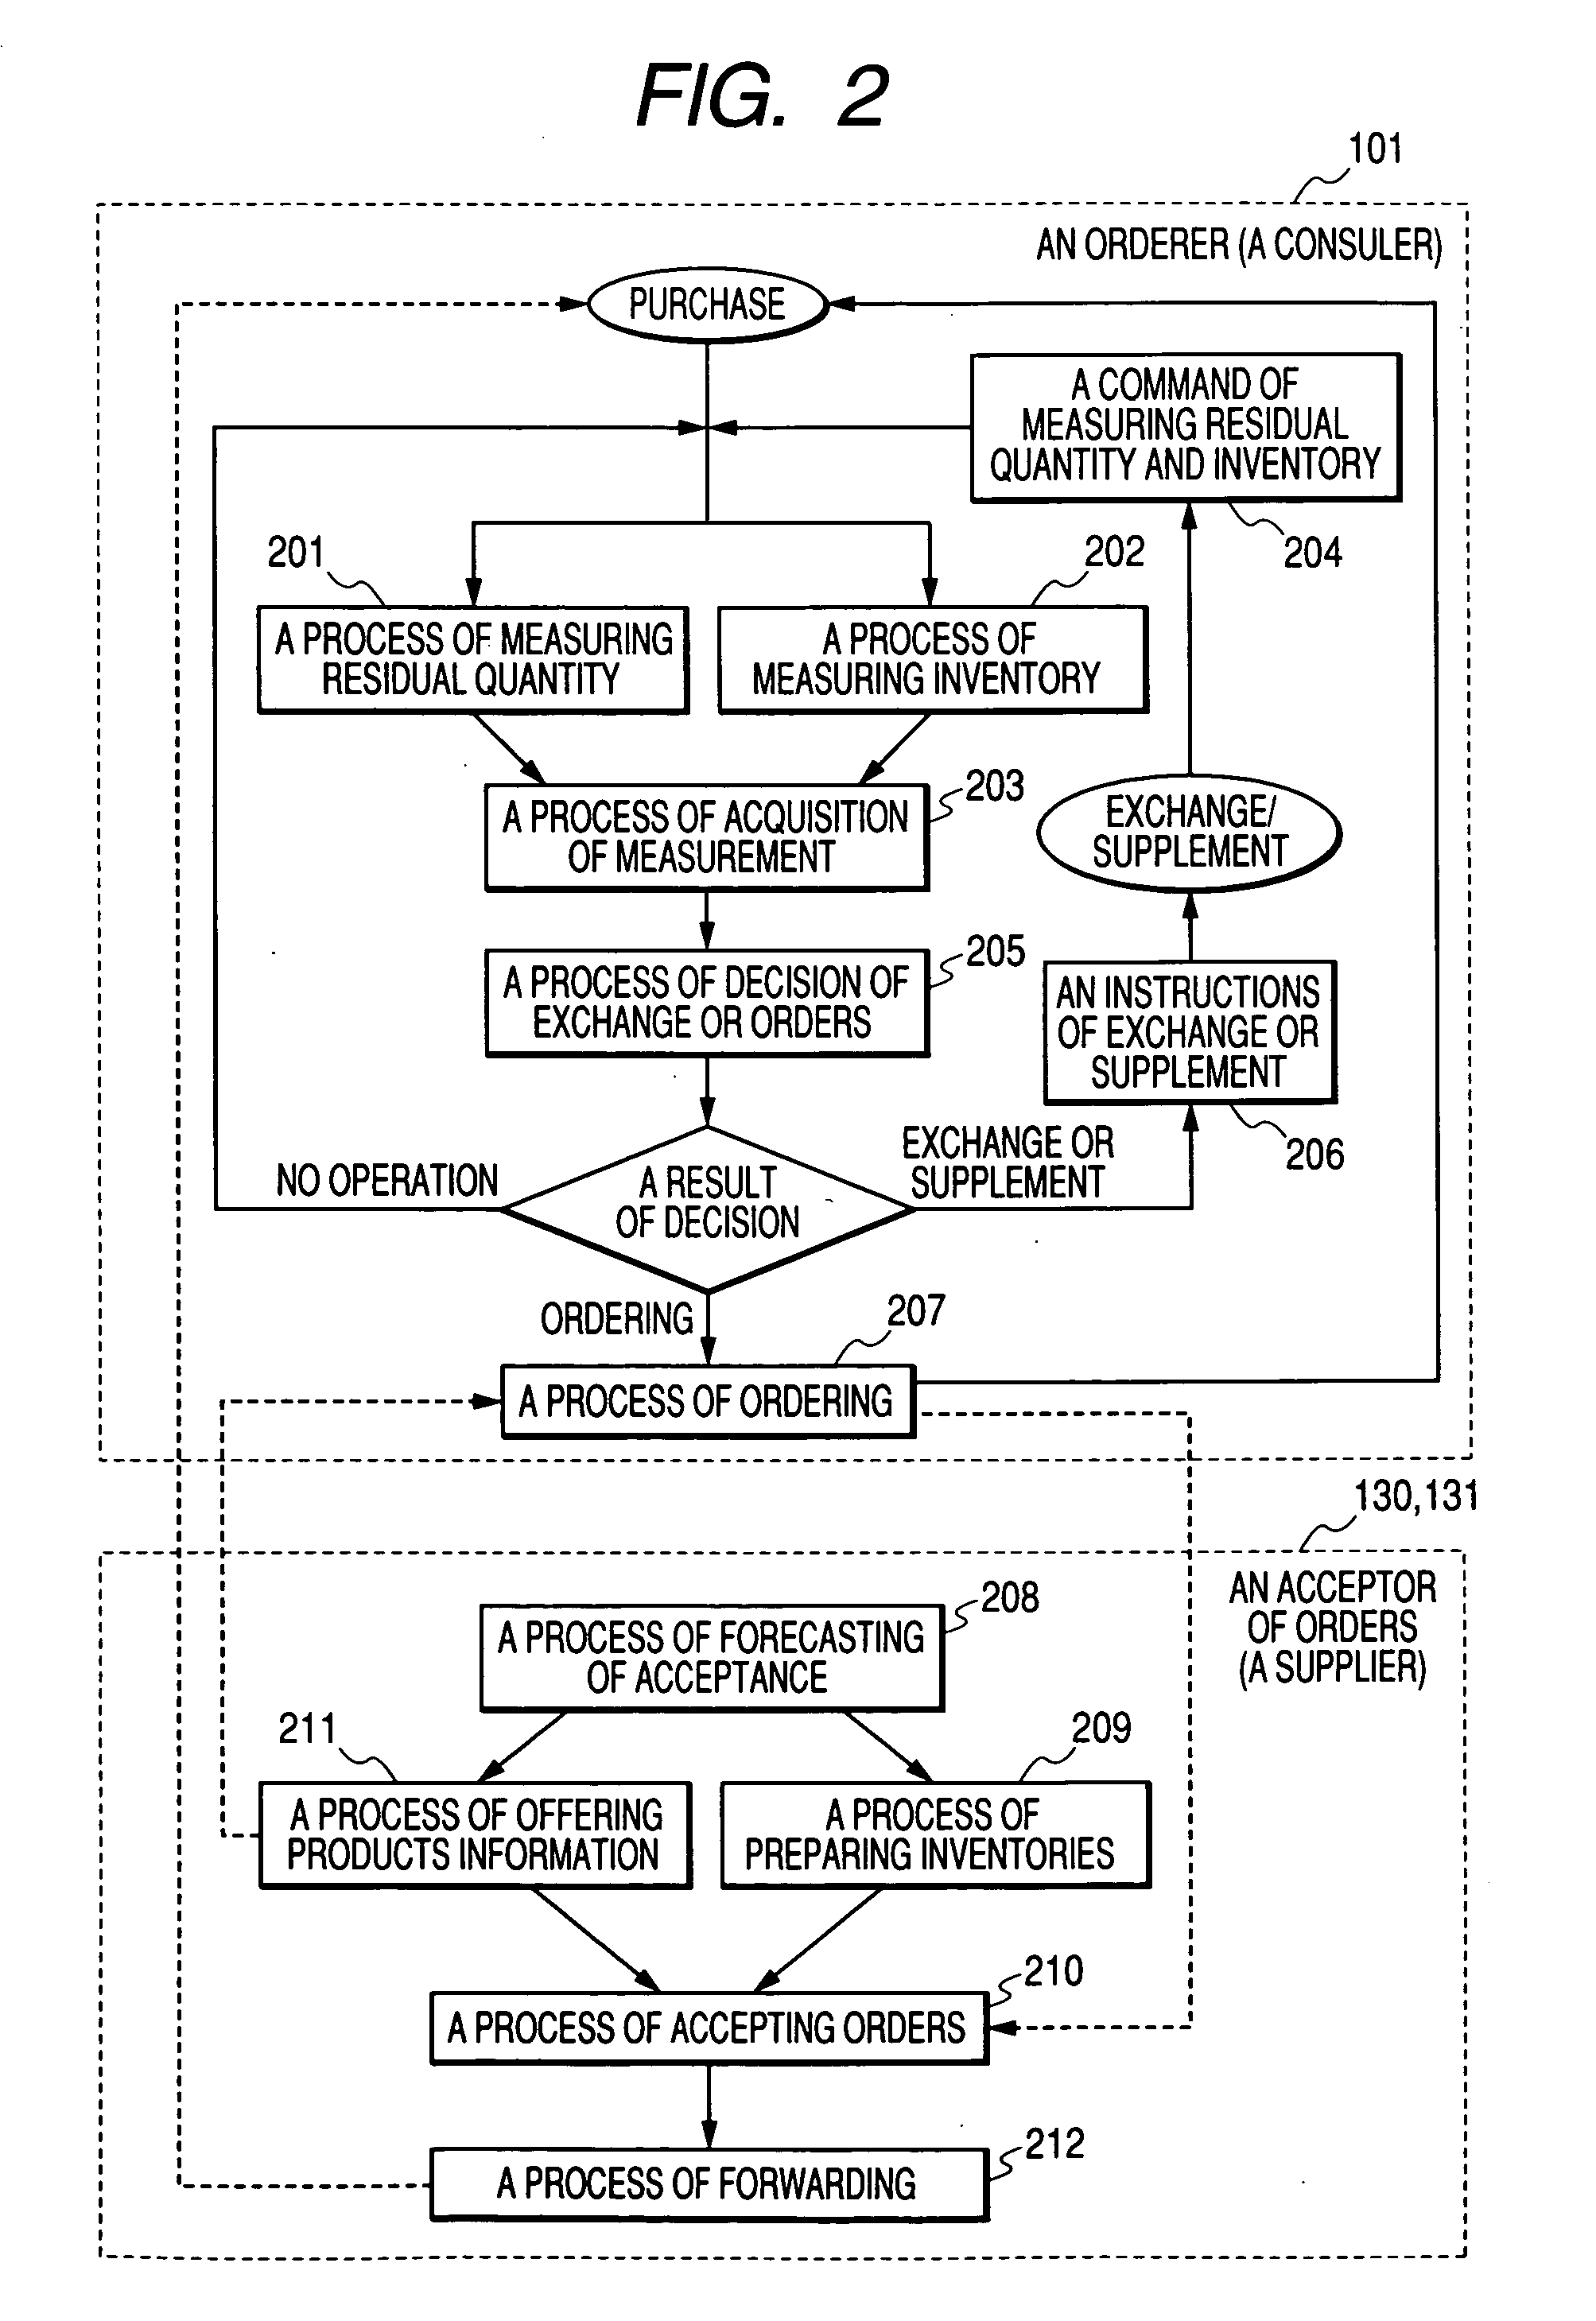 Inventory management and ordering system, and ordering management system using the previous system